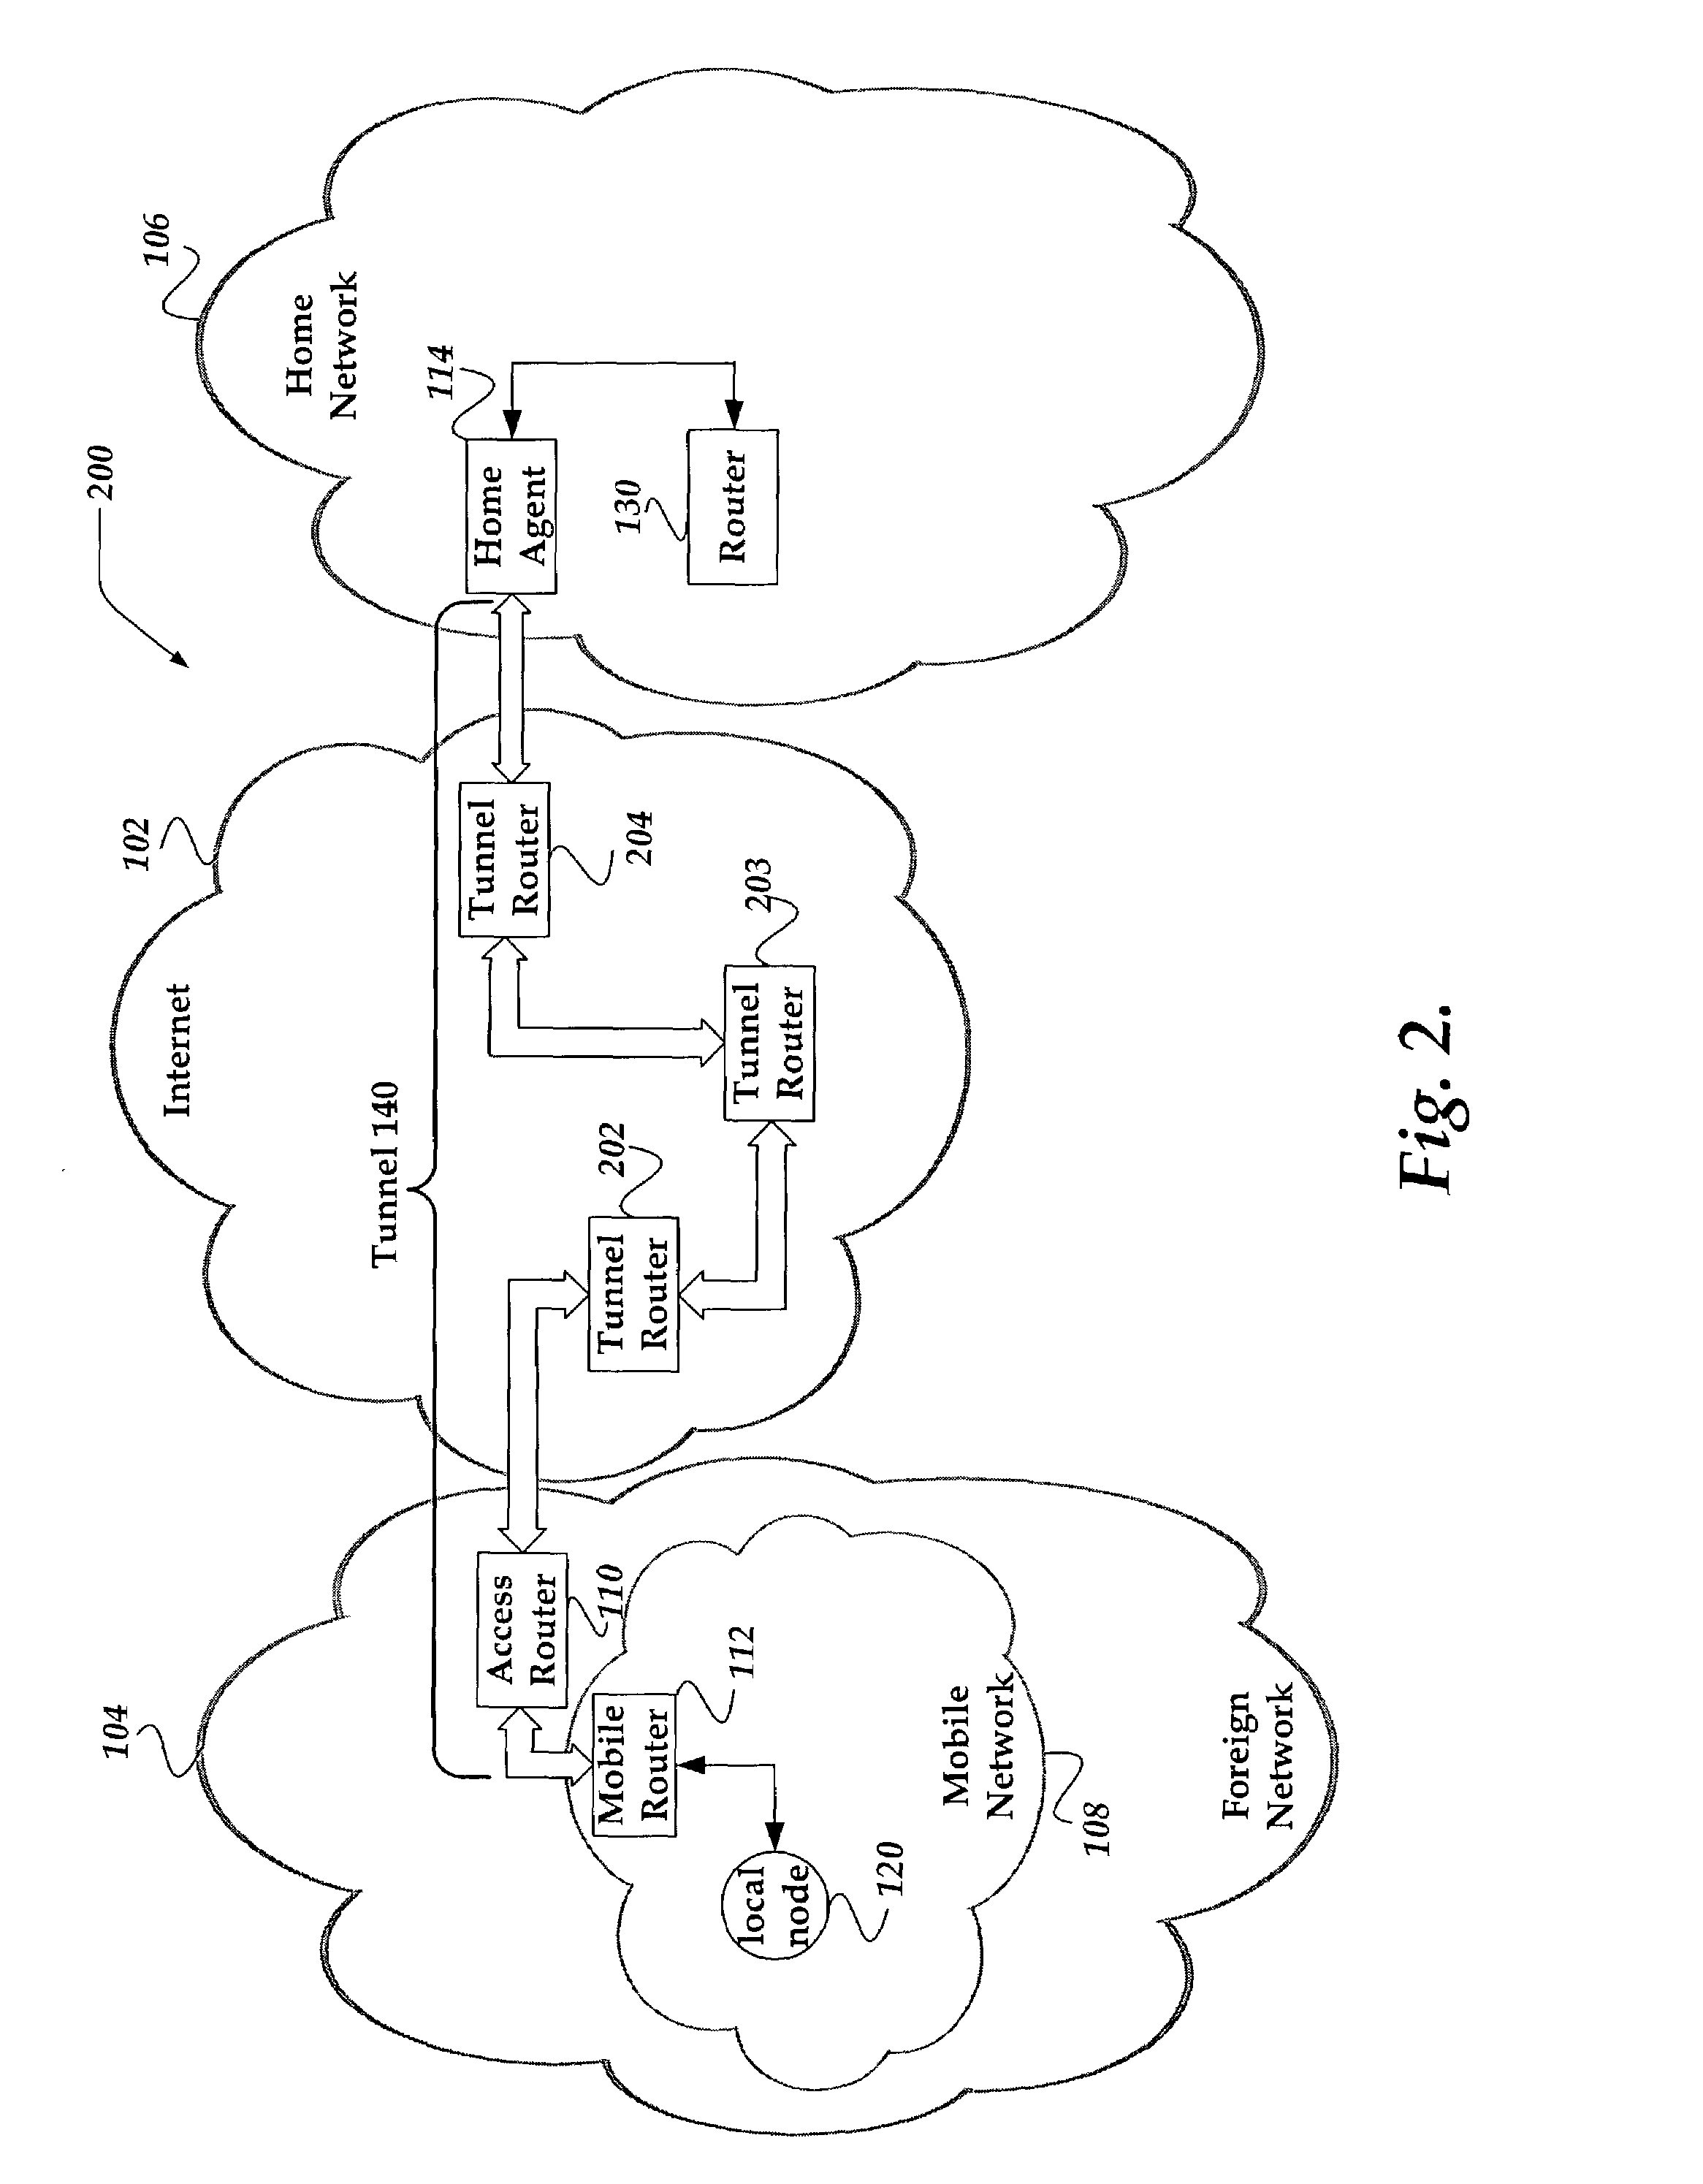 System and method for mobile router cost metric updates for routing protocols